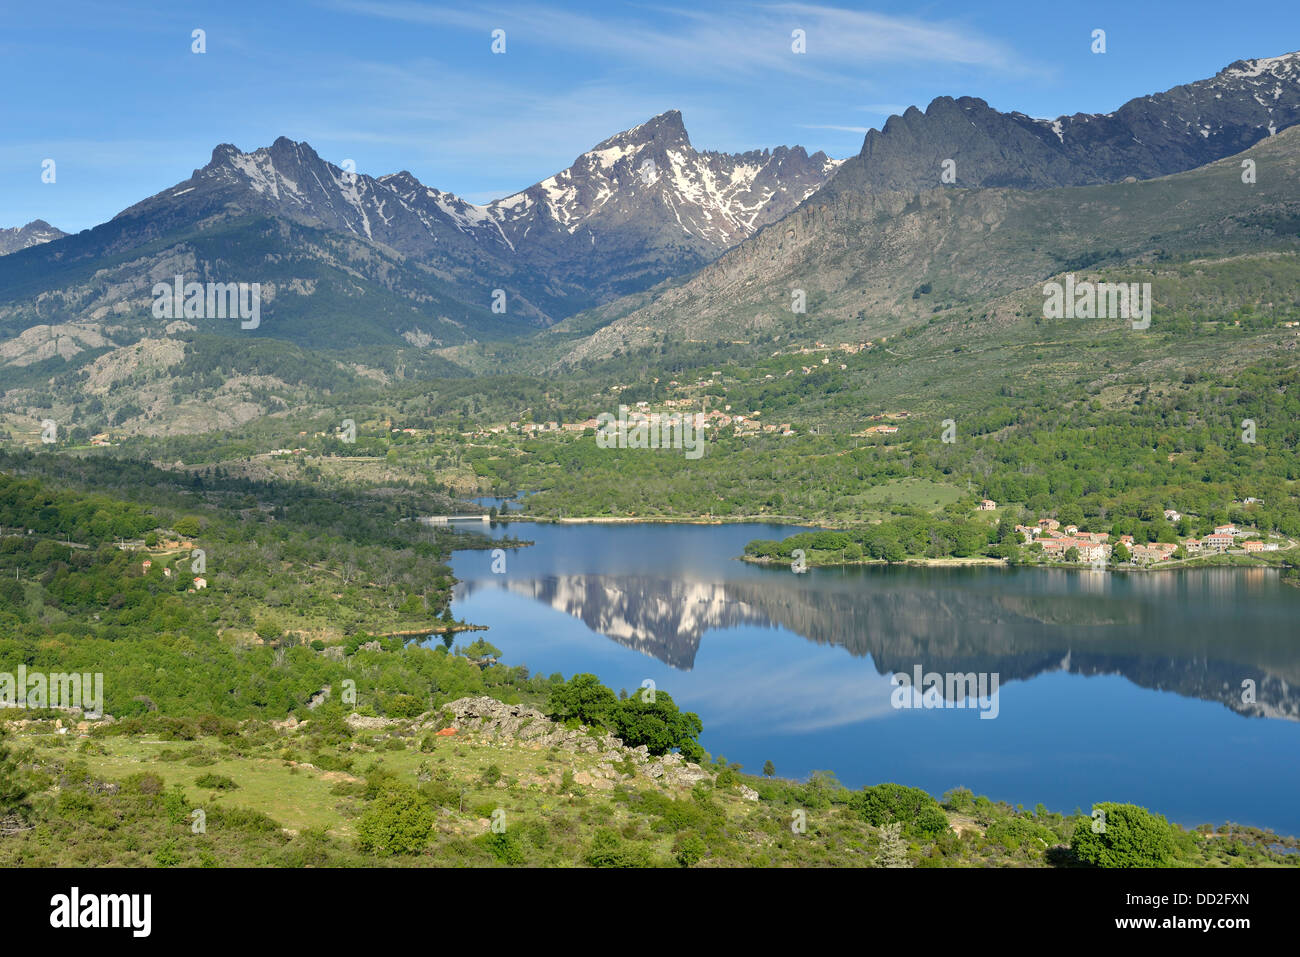 Artificial reservoir in Calacuccia with Paglia Orba and Cinque Frati peaks, Niolo Valley, Central Mountains, Corsica, France Stock Photo